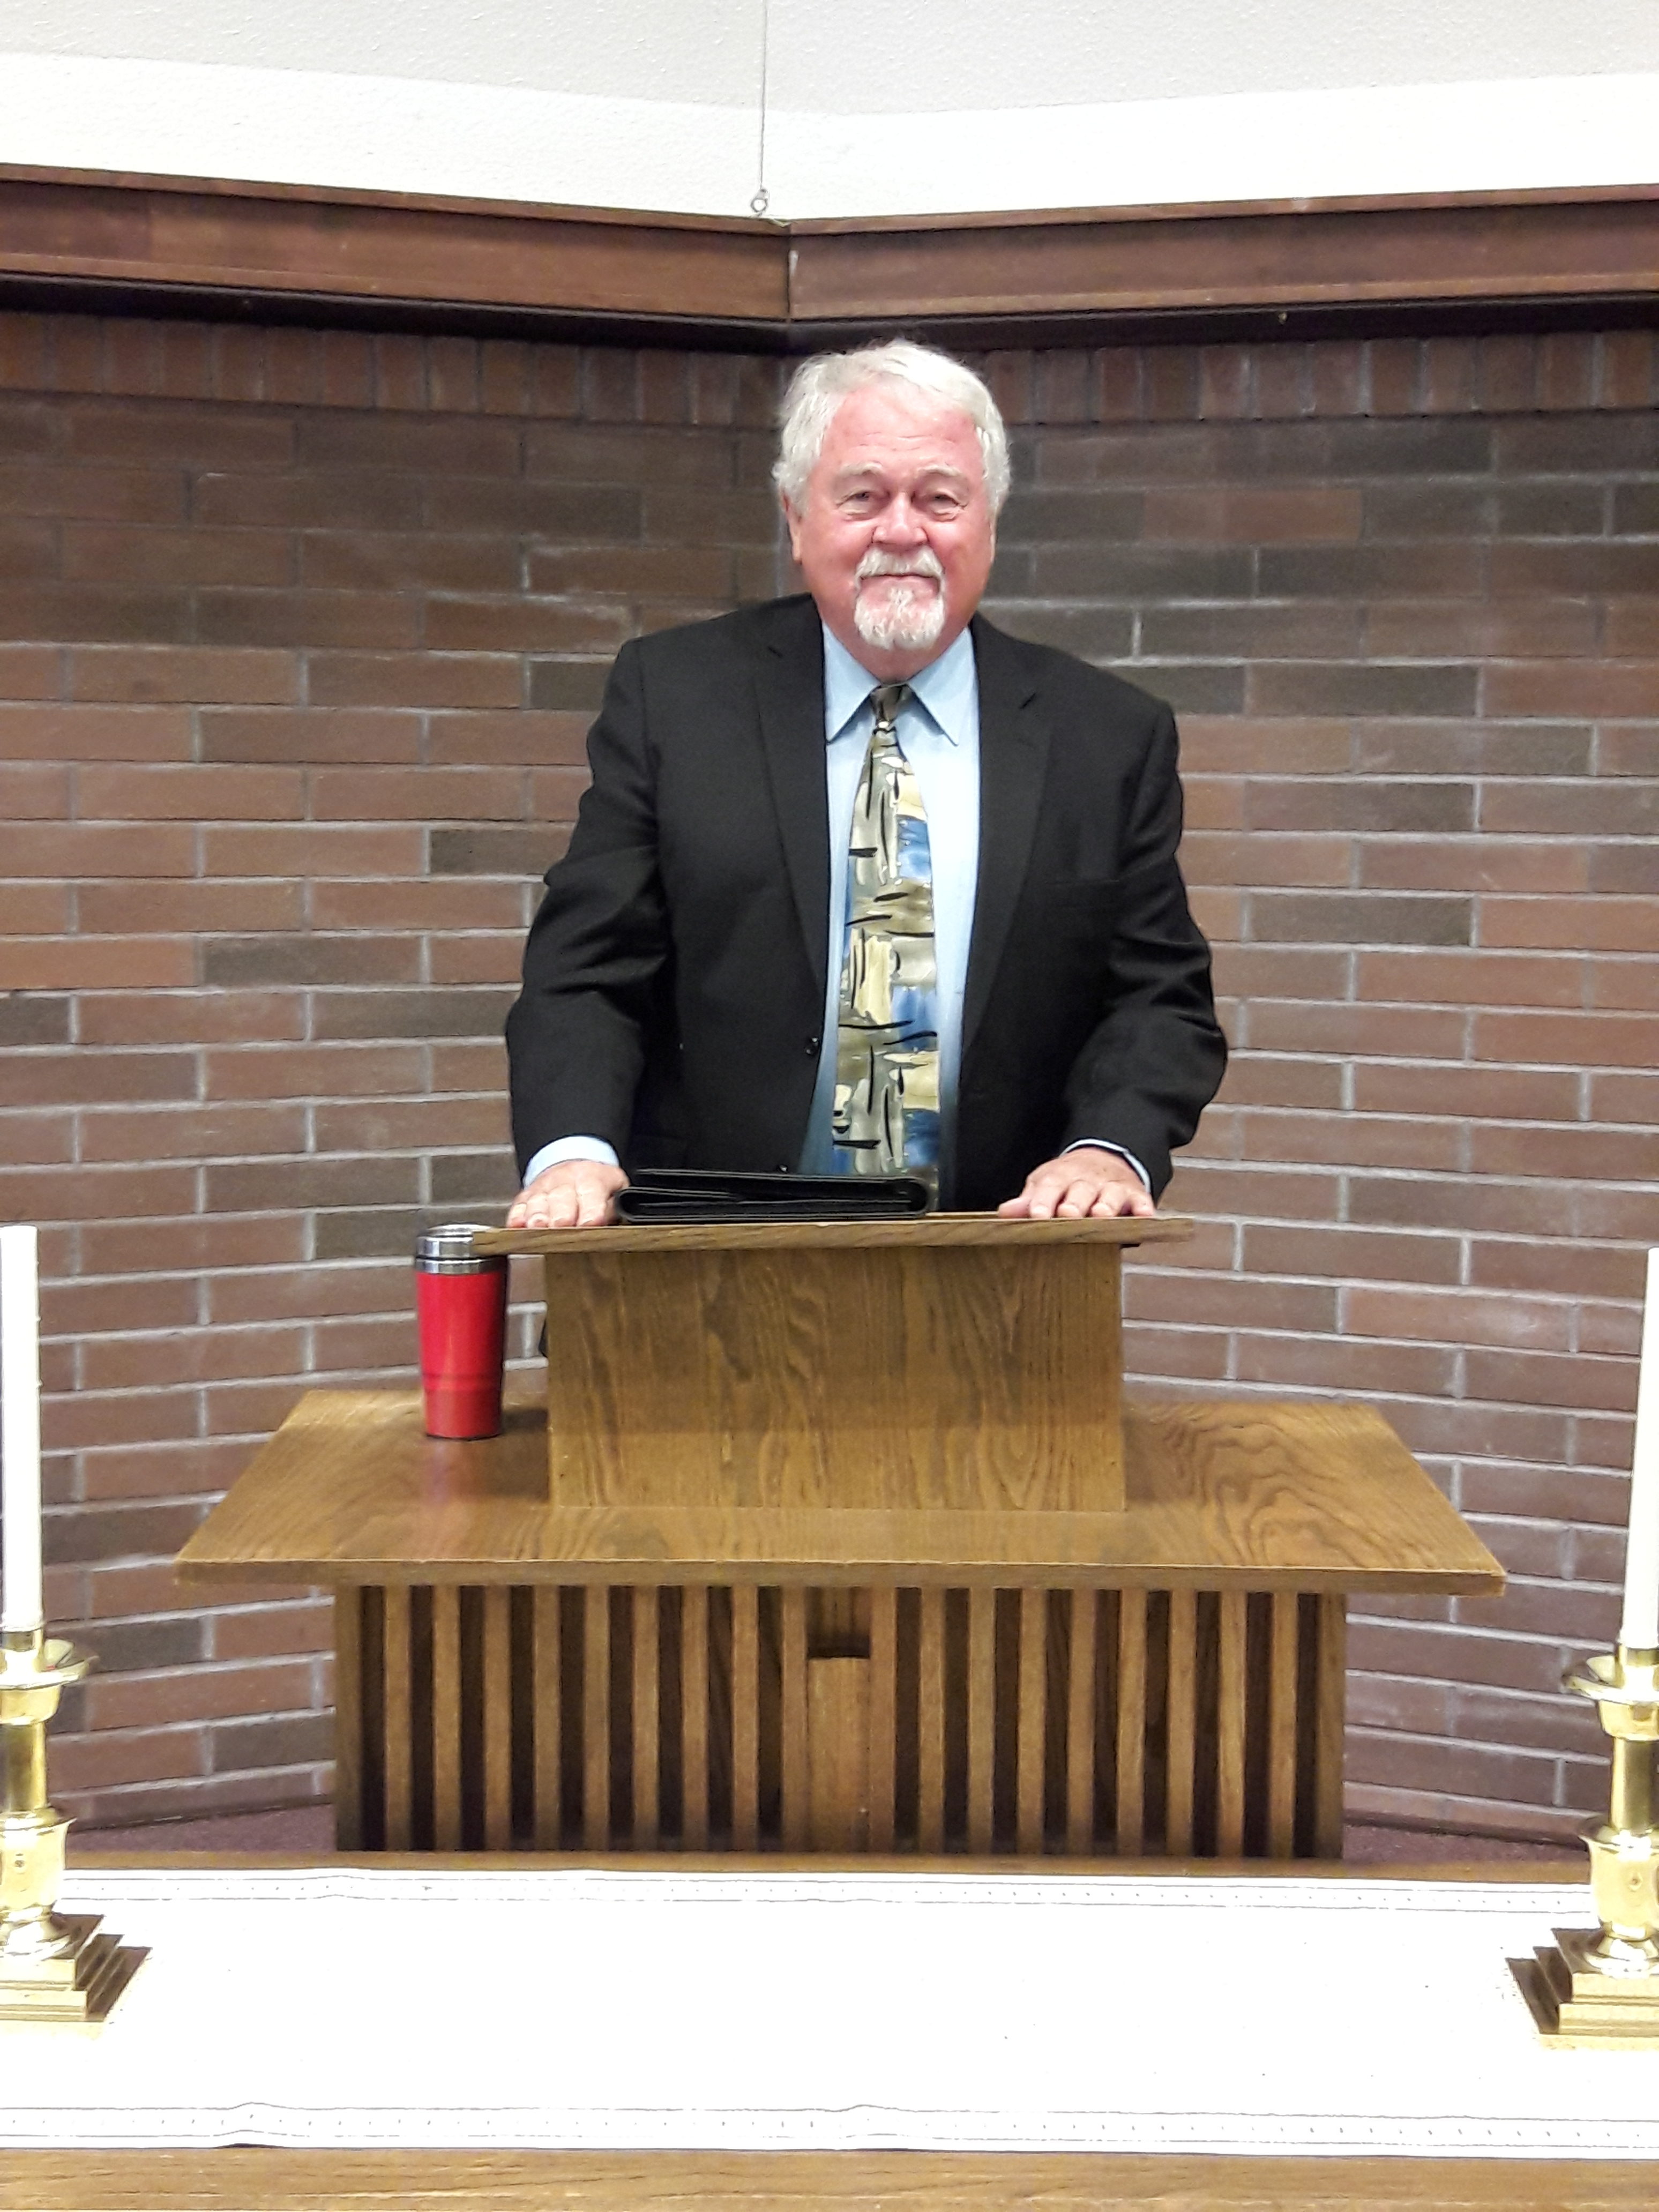 Guest Preacher: Lynn Melby – “Father of the Year”